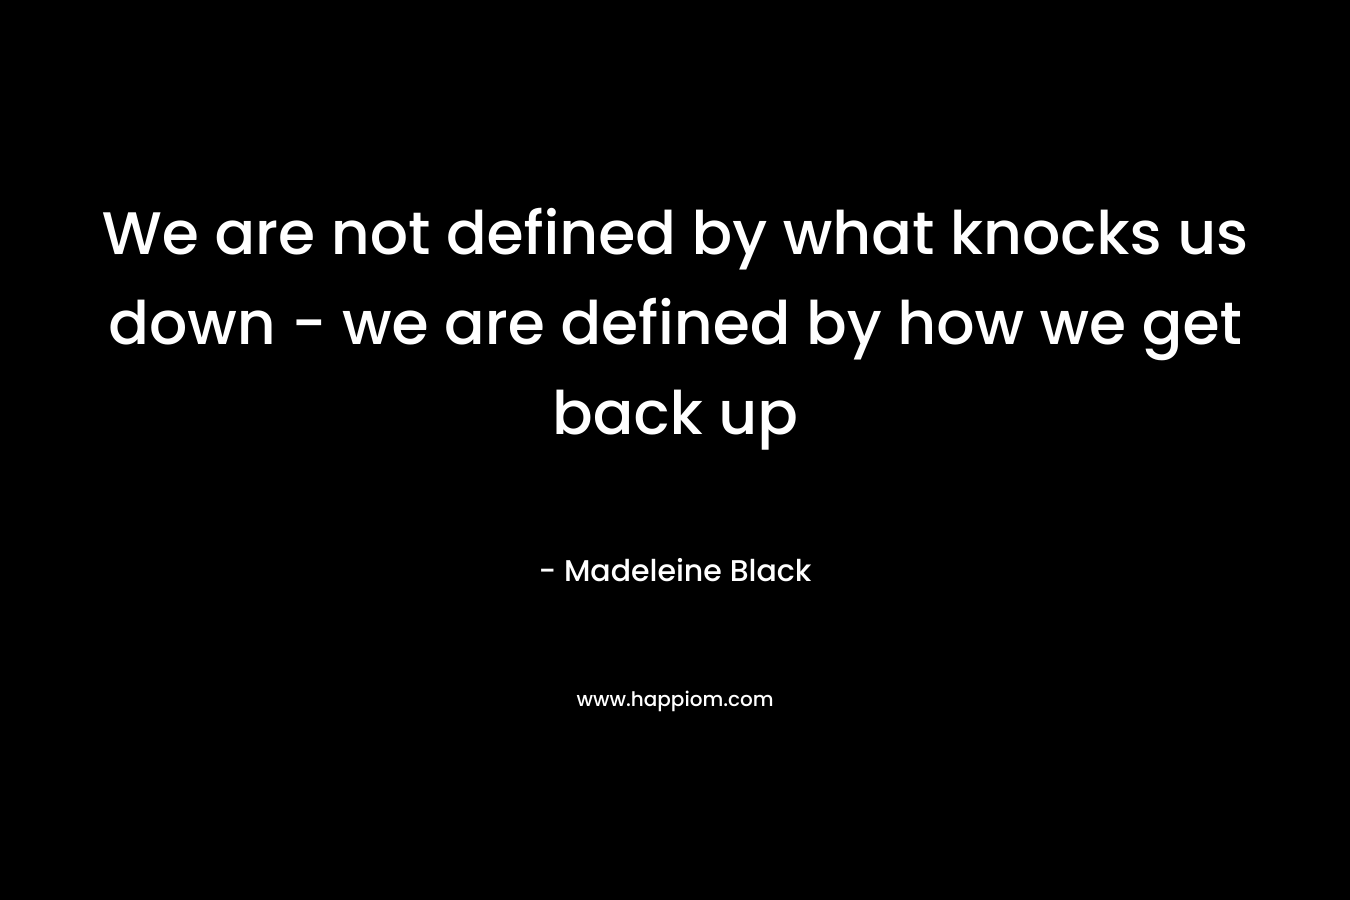 We are not defined by what knocks us down - we are defined by how we get back up